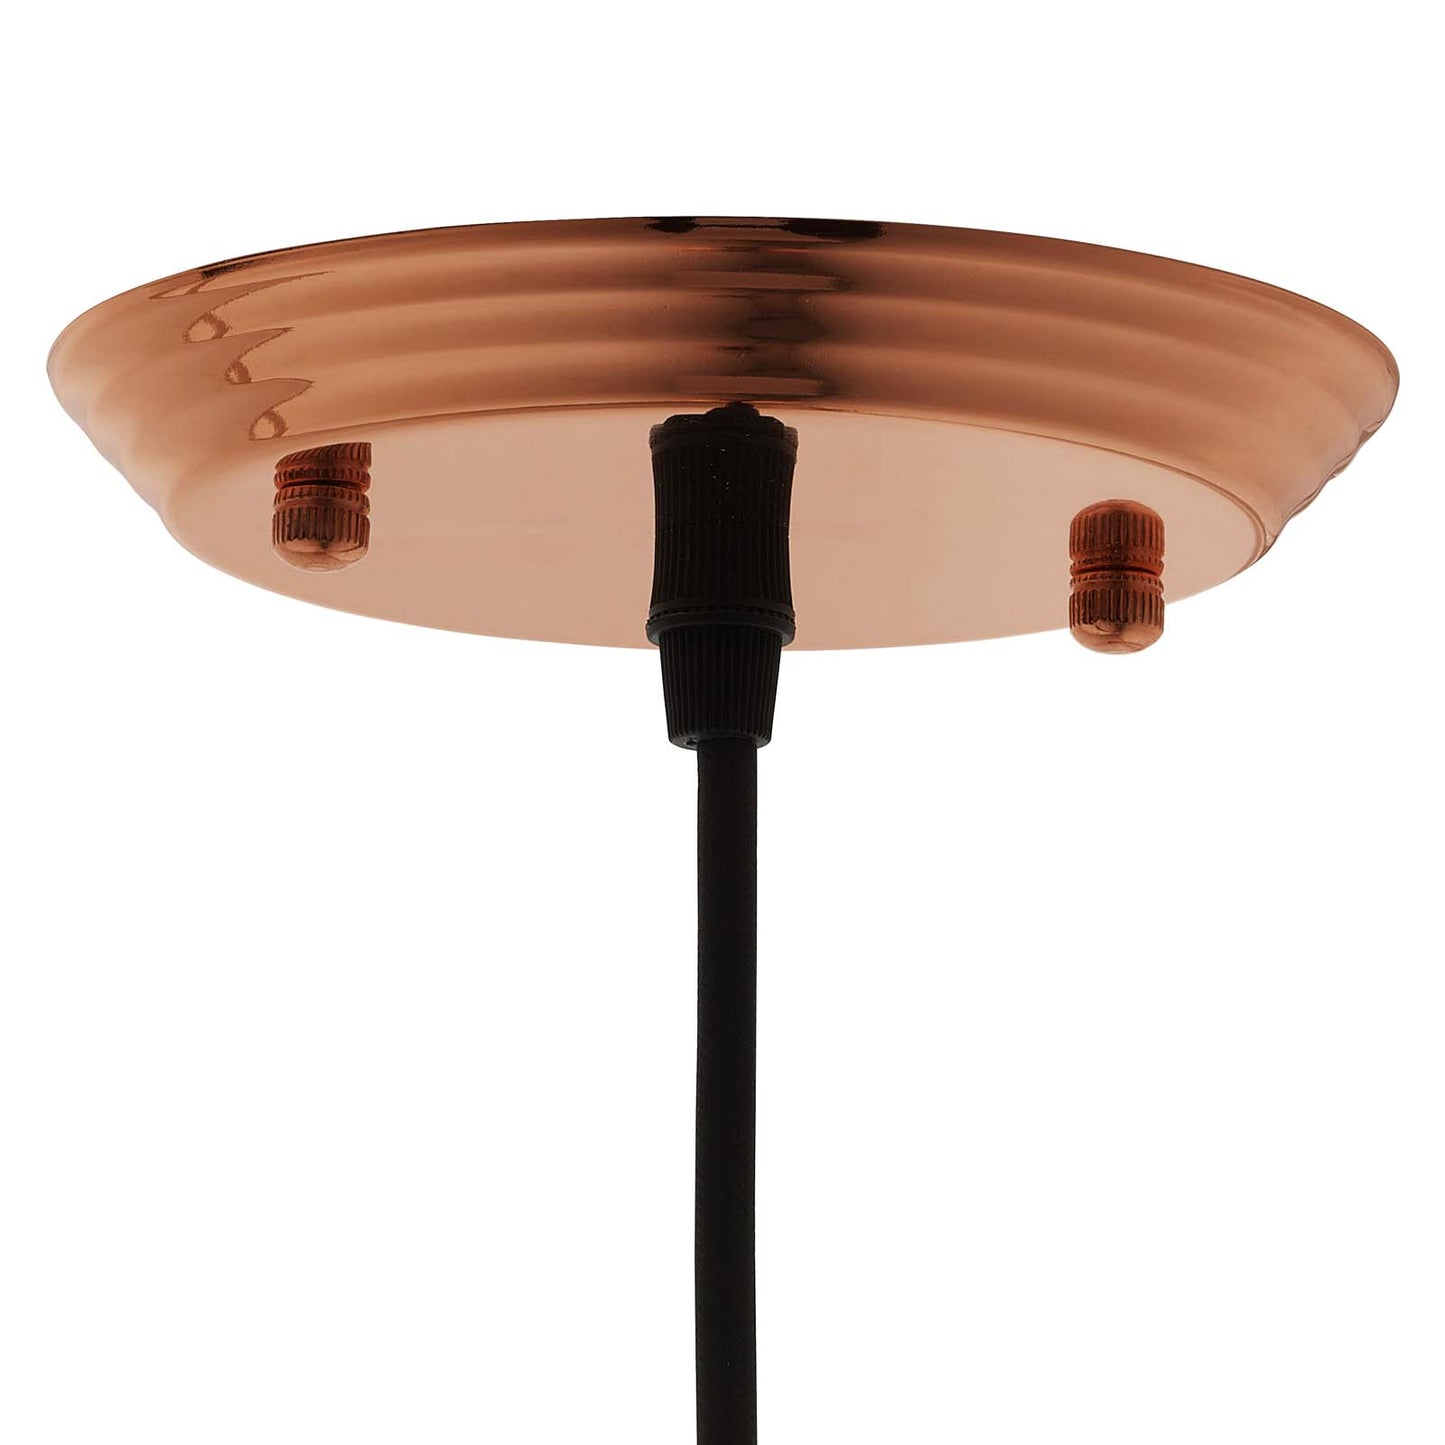 Dimple 6.5" Bell-Shaped Rose Gold Pendant Light  EEI-2903